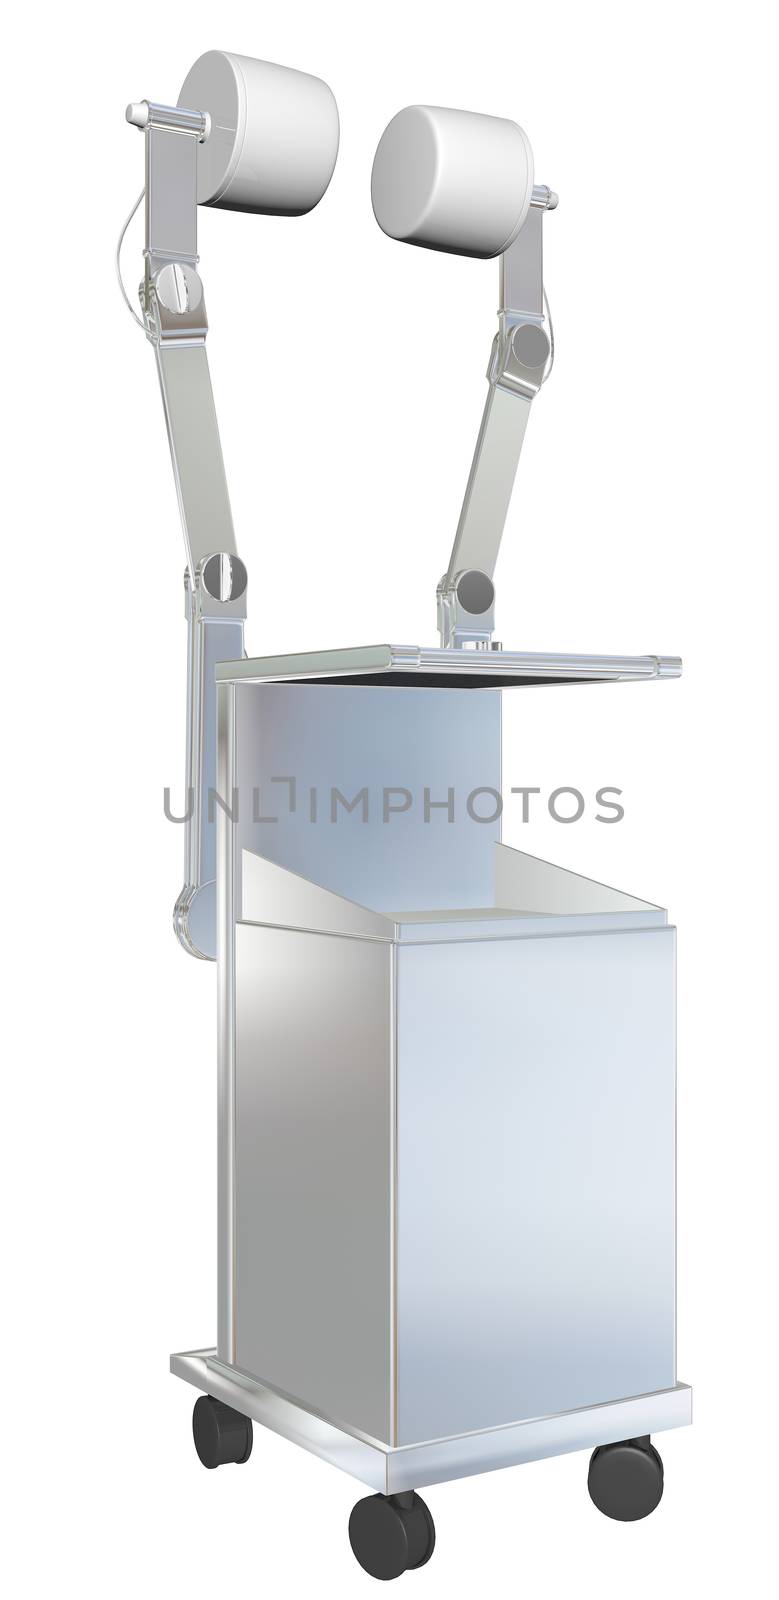 Mobile medical equipment, metal, 3D illustration, isolated against a white background.